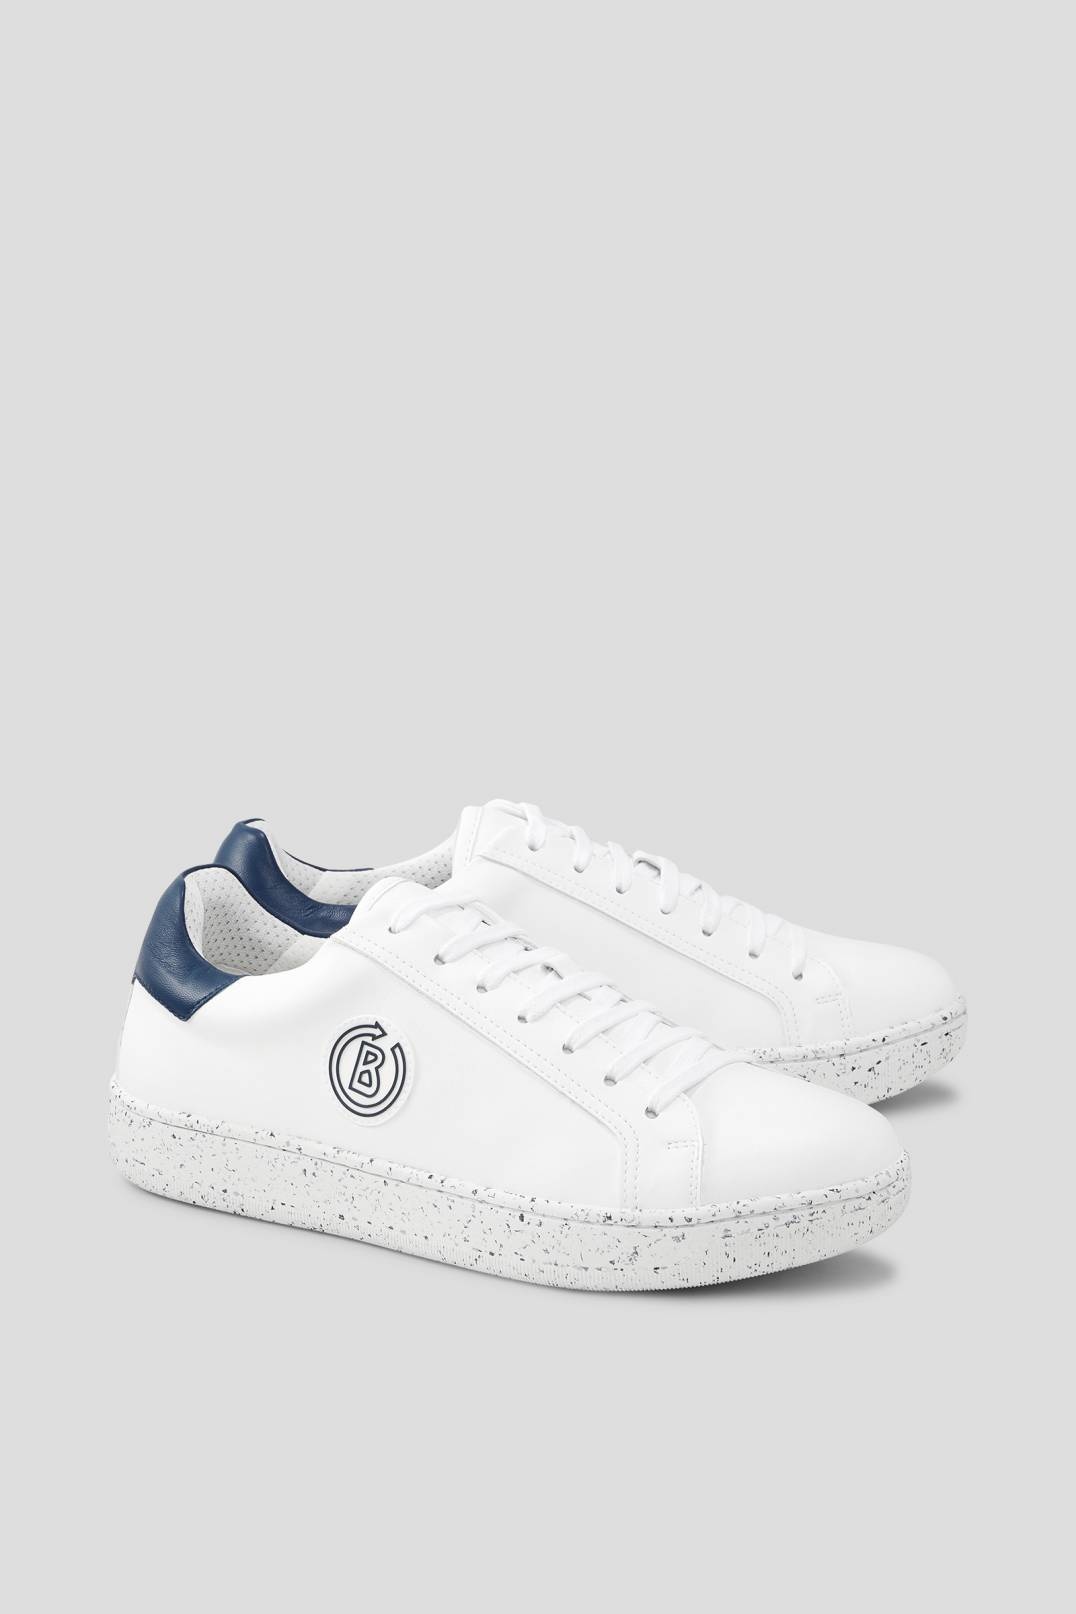 MALMÖ SUSTAINABLE SNEAKERS IN WHITE/NAVY BLUE - 3